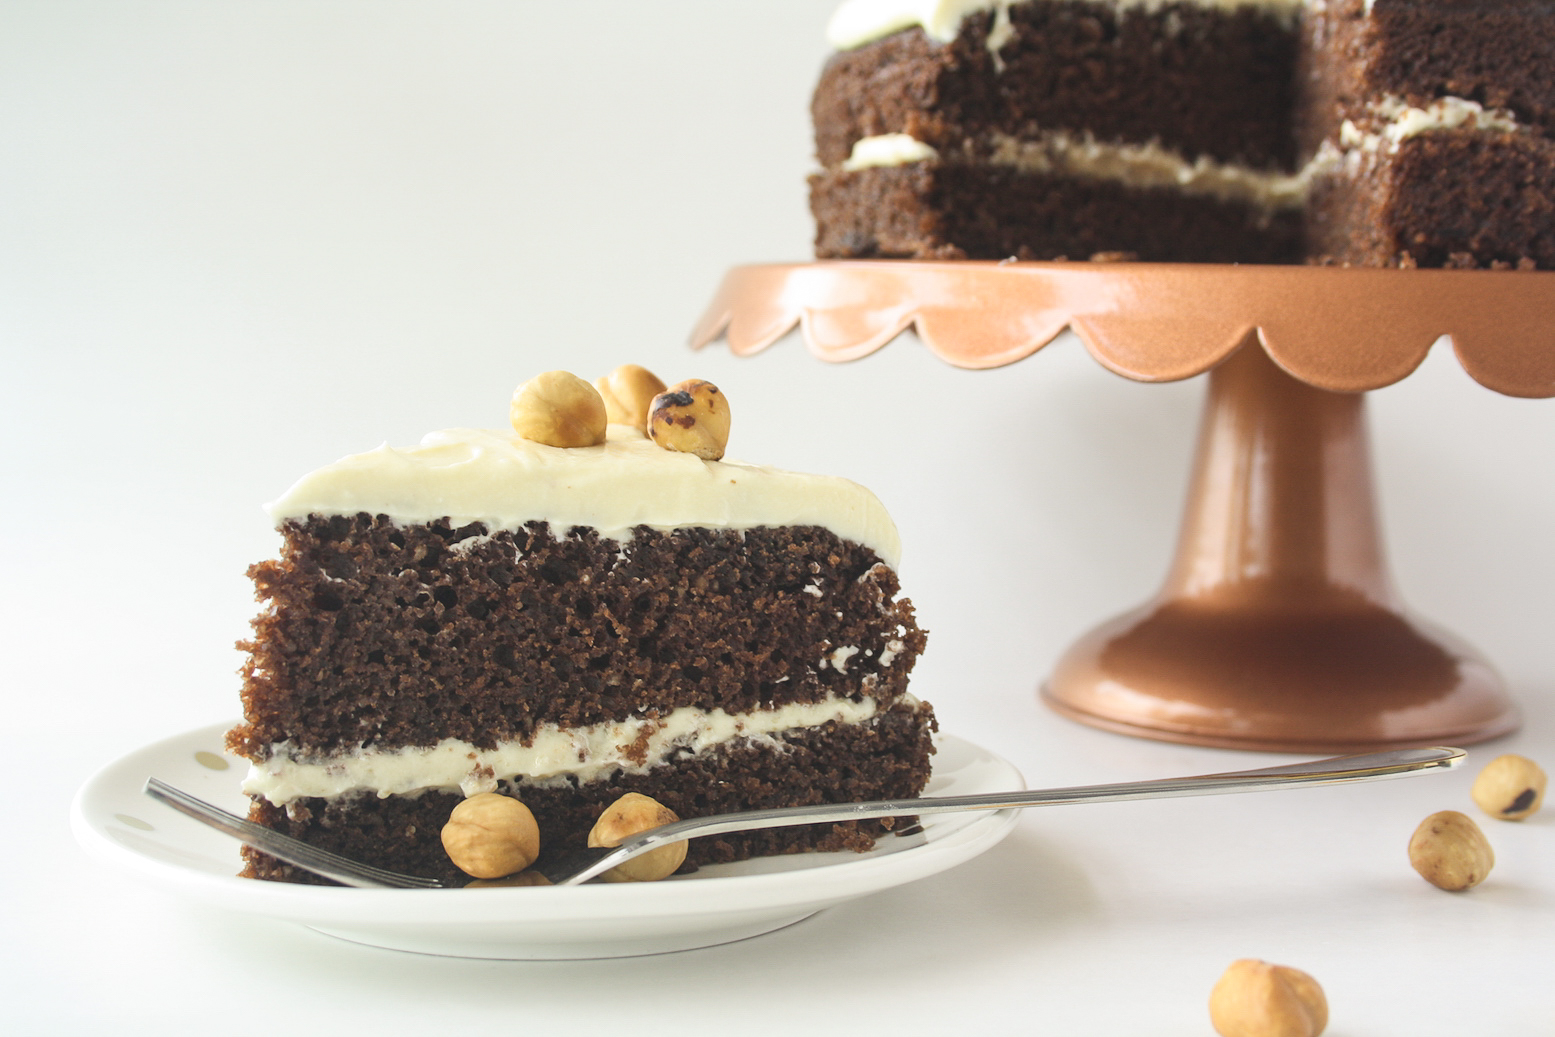 Moist chocolate cake filled with hazelnuts, layered with a hazelnut cream cheese frosting!